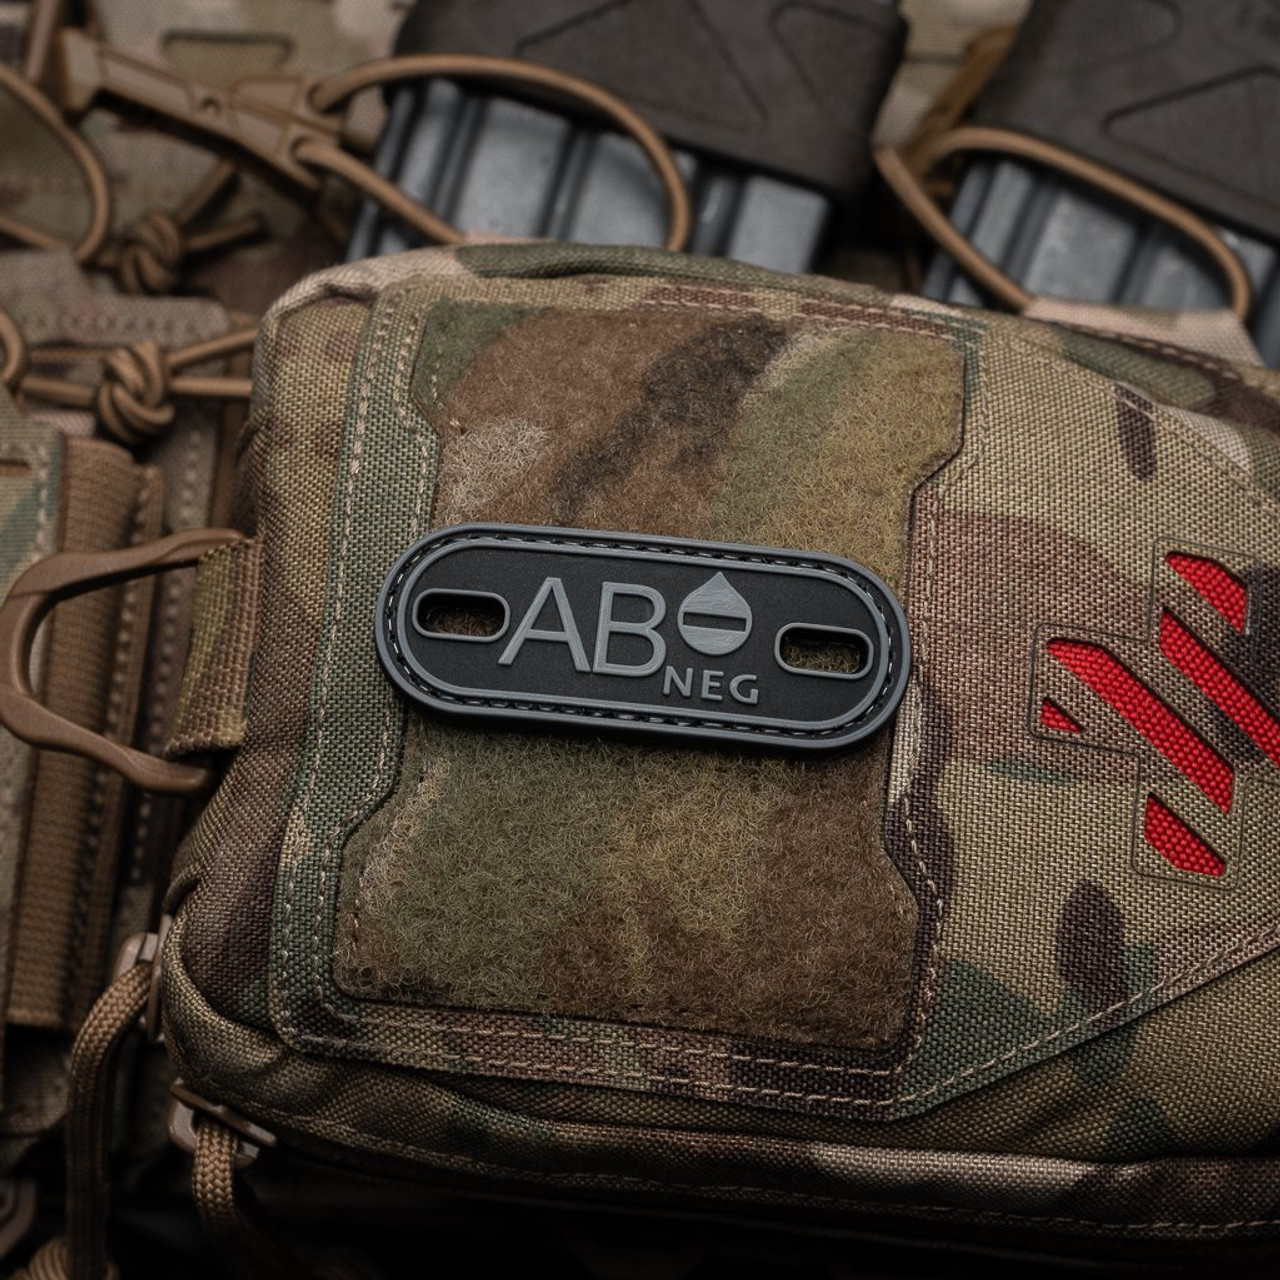 Blood Type Patch PVC by NEO Tactical Gear